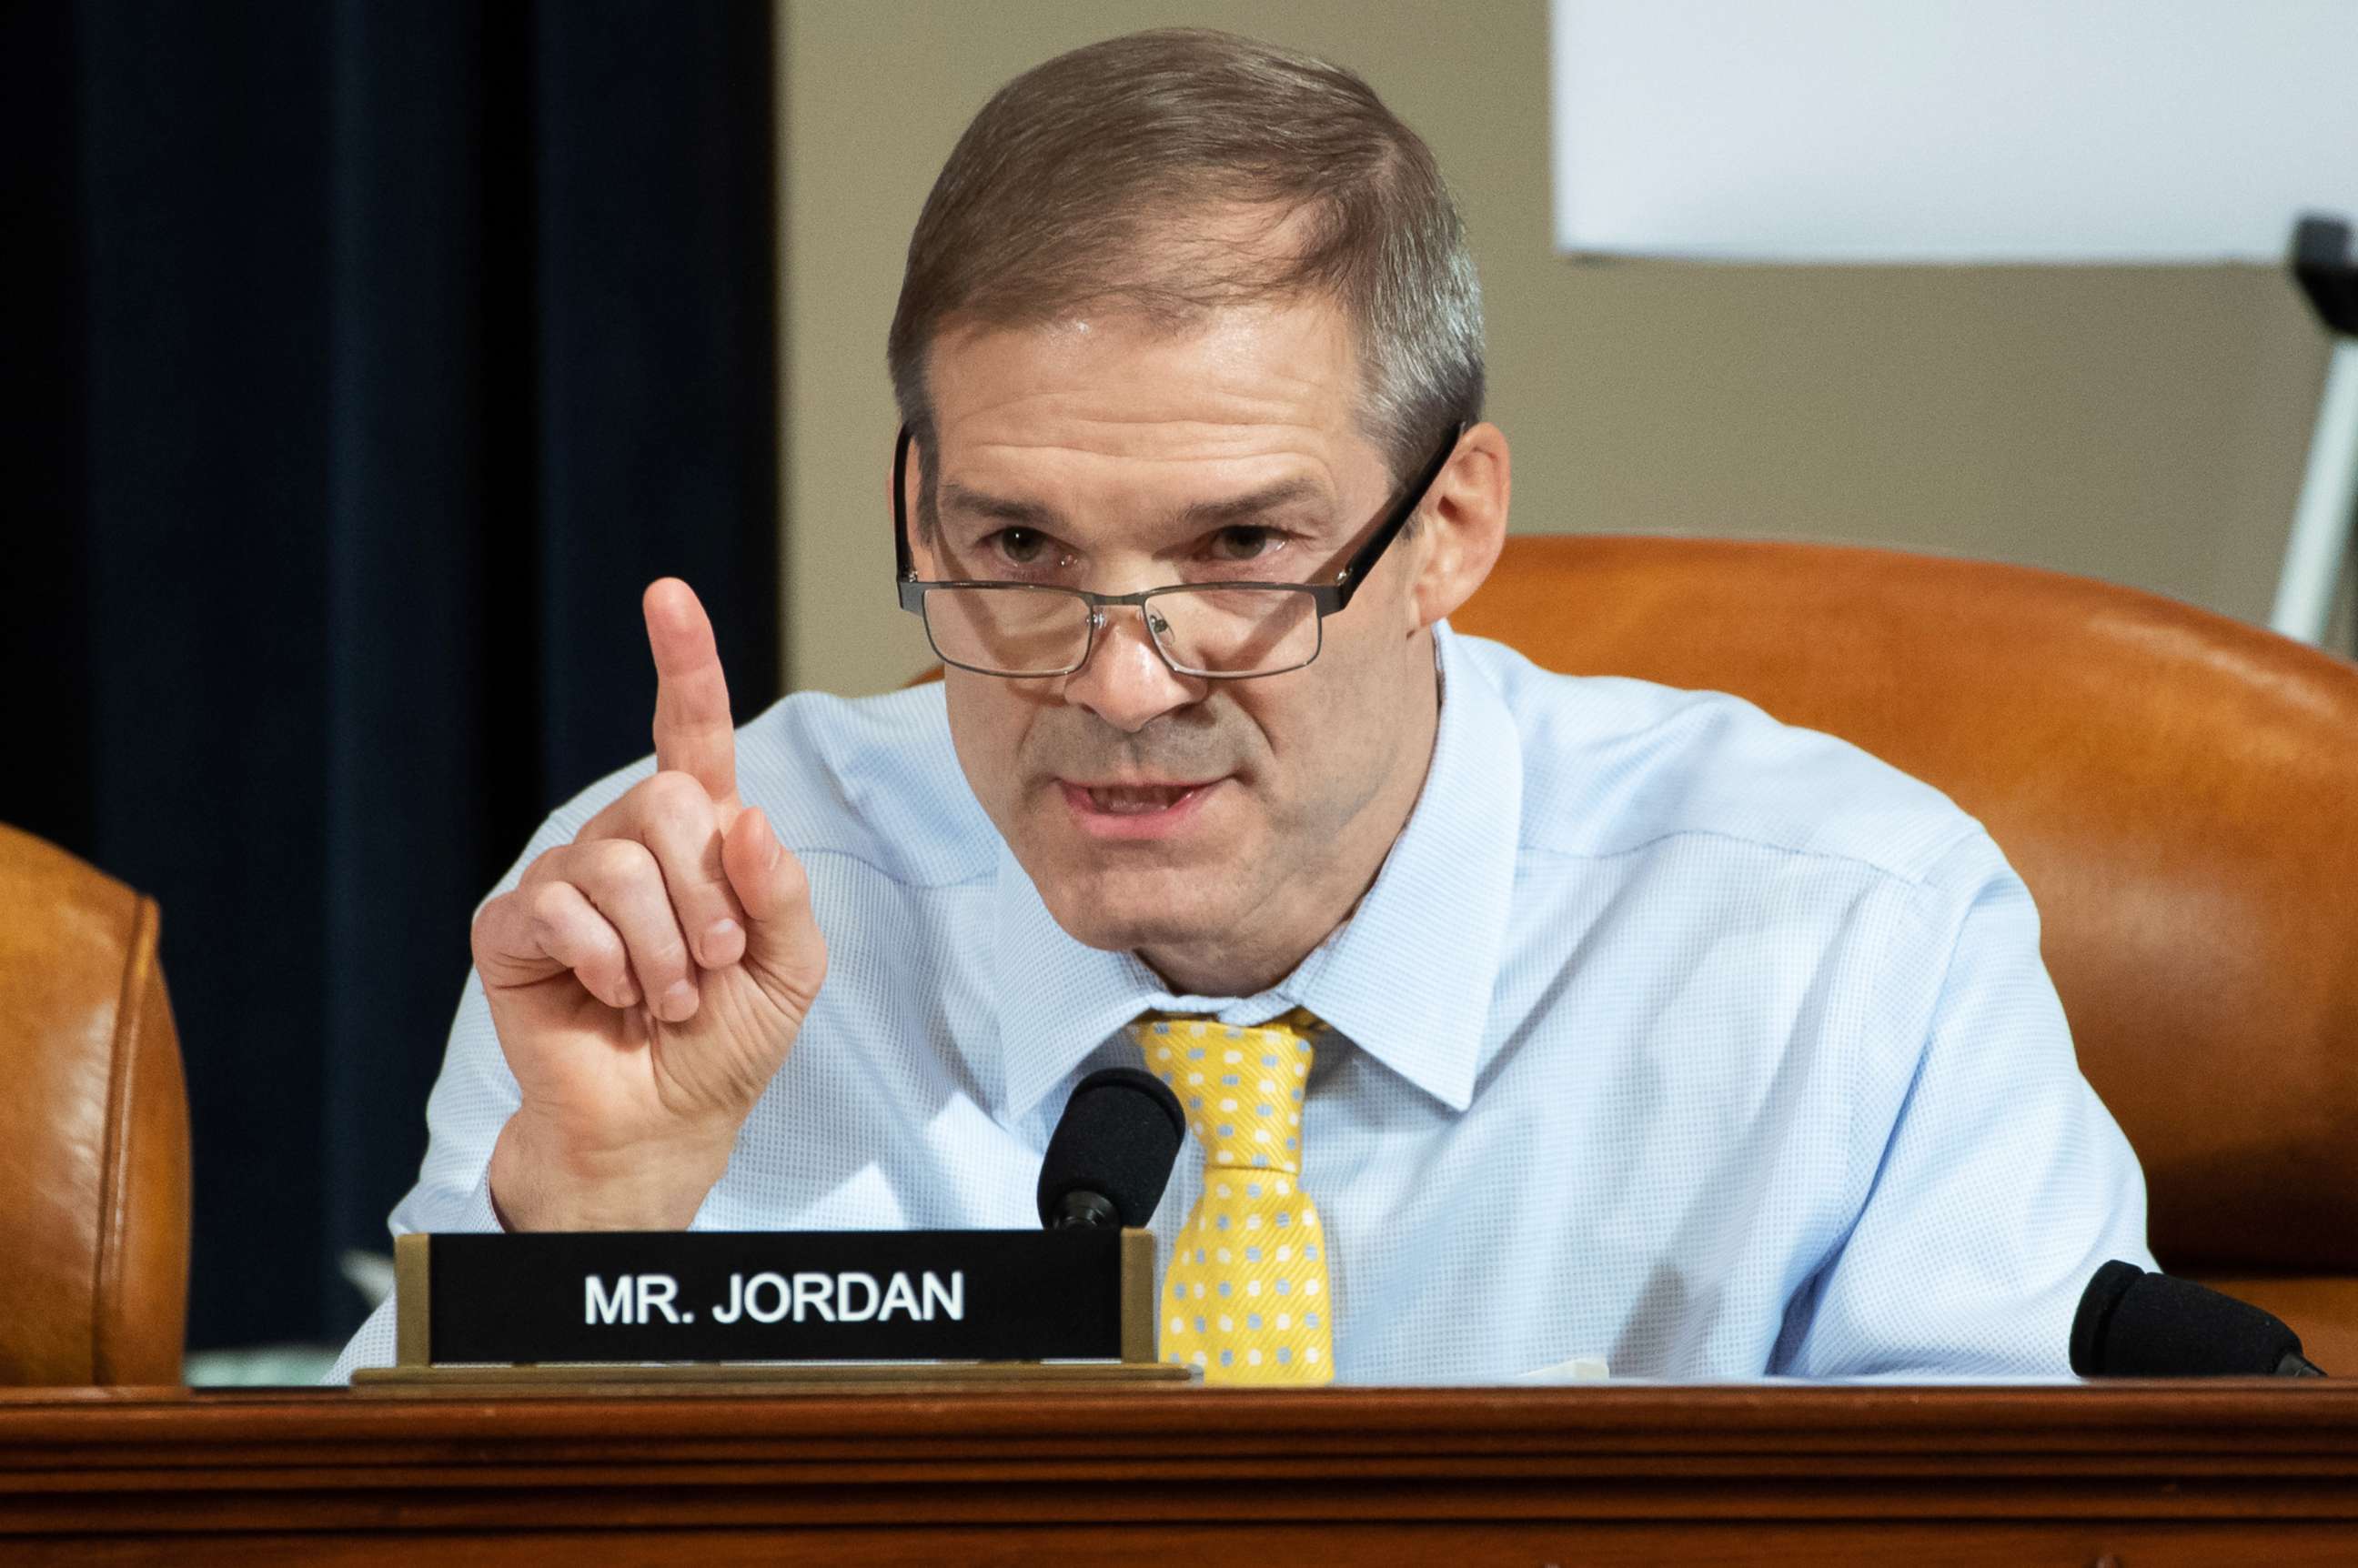 PHOTO: Rep. Jim Jordan asks questions of witnesses during the first public hearings held by the House Permanent Select Committee on Intelligence as part of the impeachment inquiry into President Donald Trump, on Capitol Hill, Nov. 13, 2019.